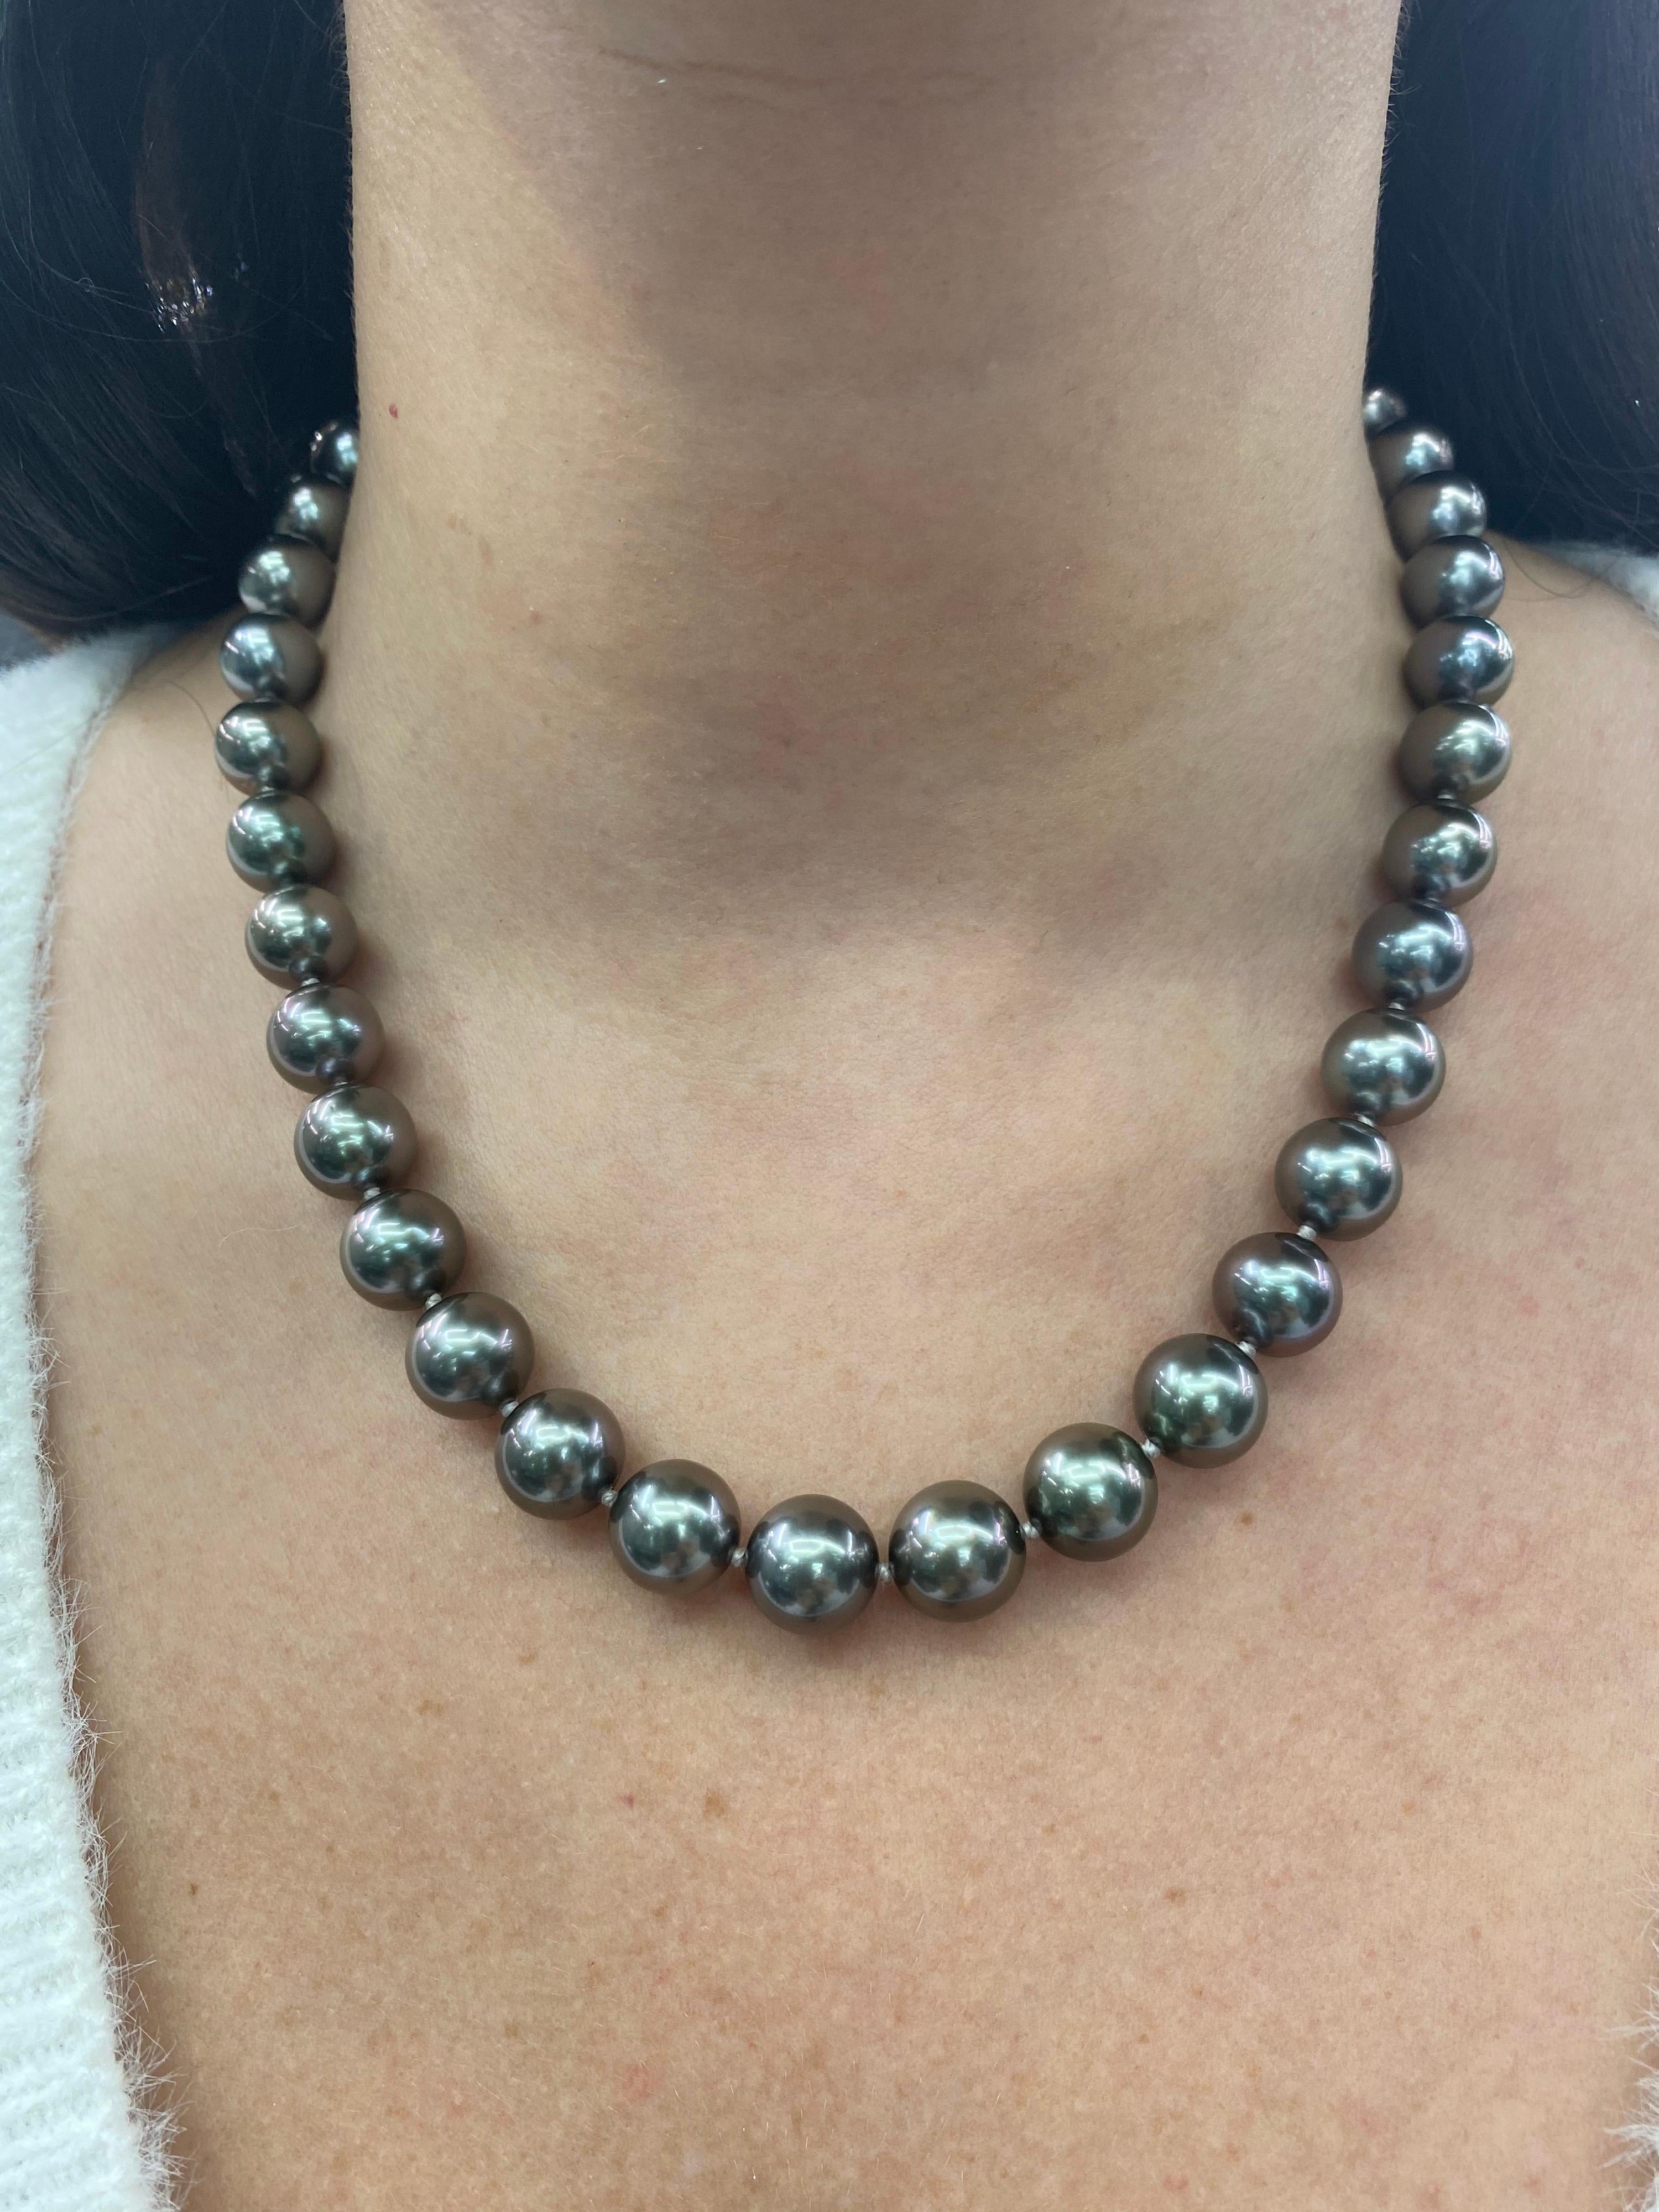 Perfectly matched pearl strand necklace featuring 39 Tahitian pearls measuring 10-11.3 mm with a high polish ball clasp in 14K White Gold. 

Pearl quality: AAA
Pearl Luster: AAA Excellent
Nacre : Very Thick

Strand can be made to order, shortened or